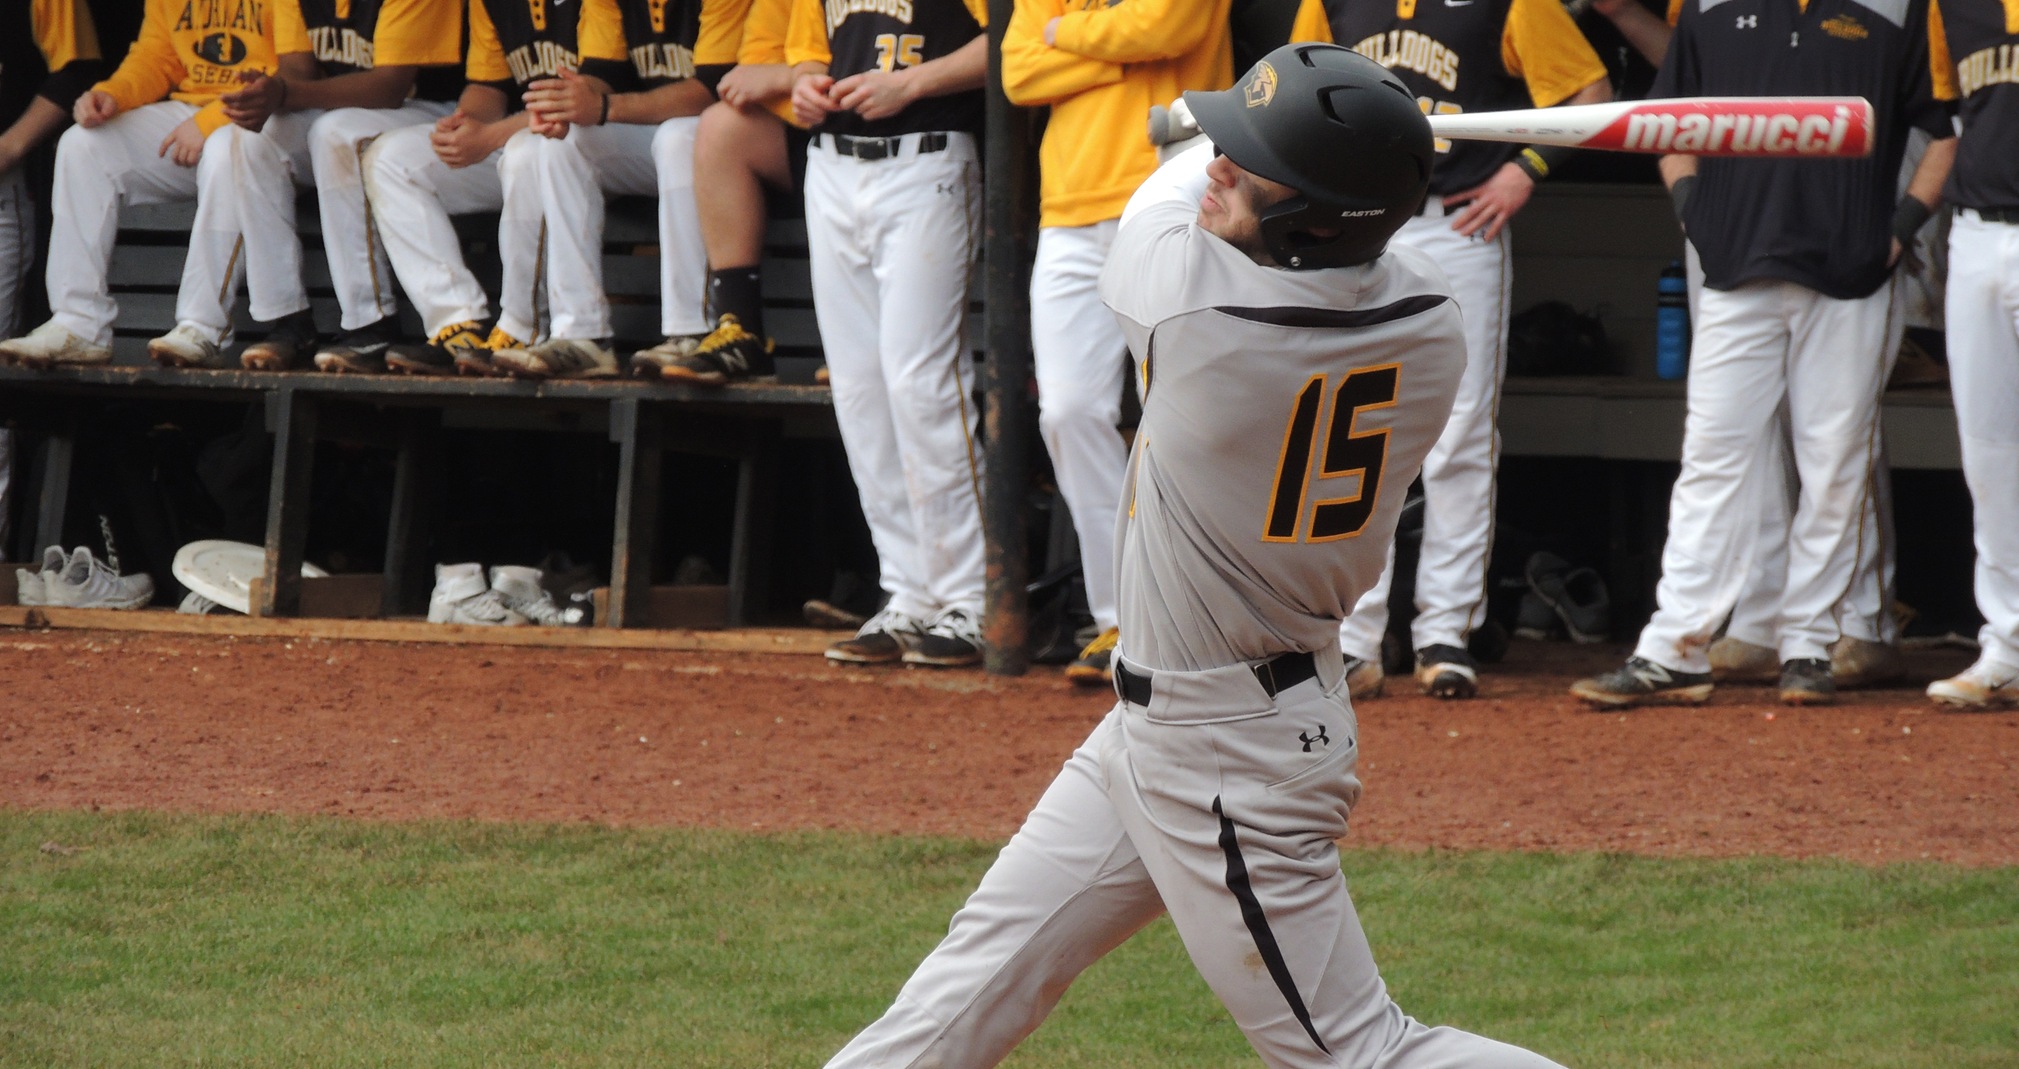 Eric Modaff had three hits and one run batted in against the Pioneers.